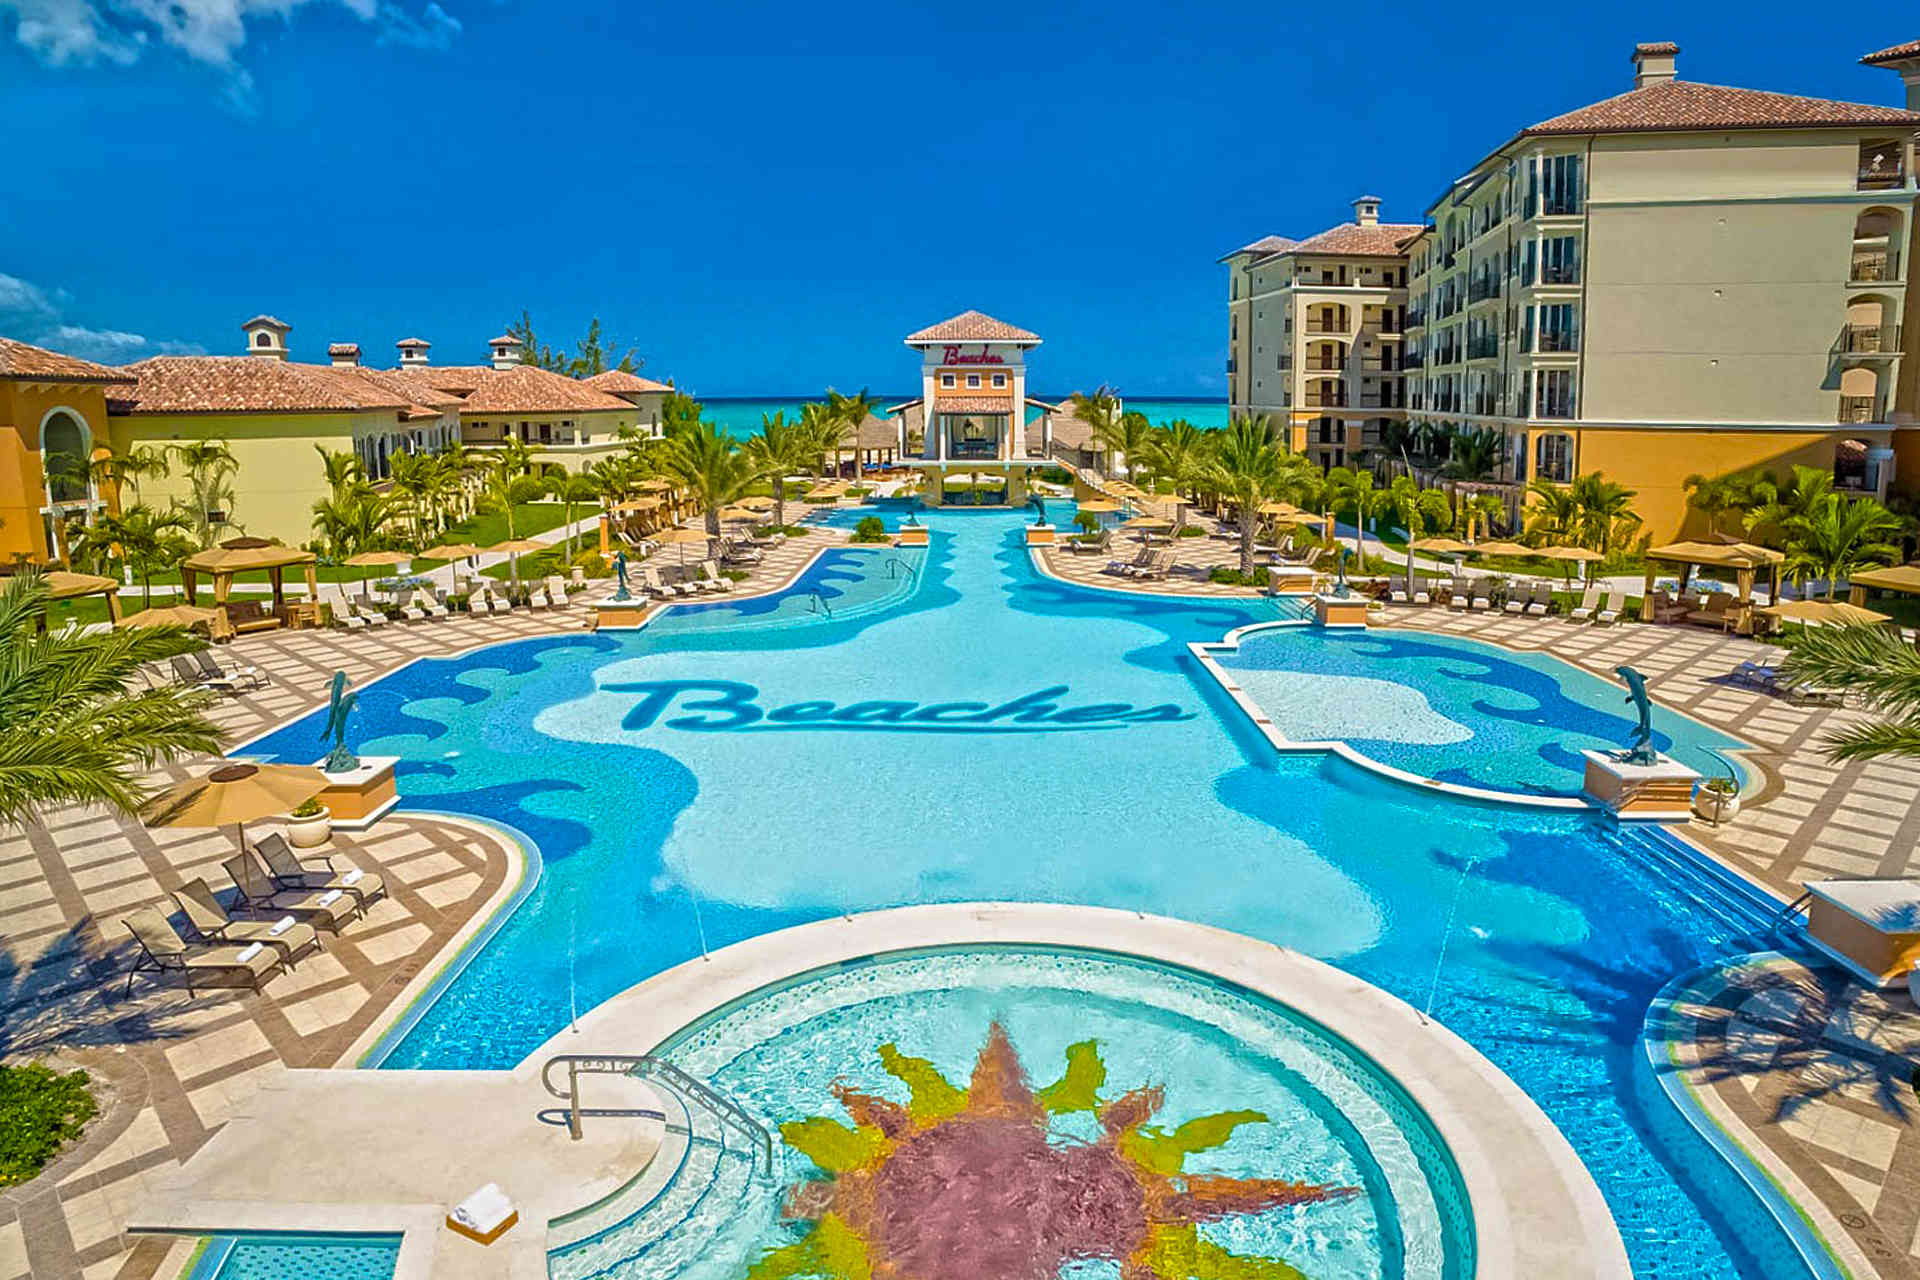 Beaches Resorts – Want to know more? Call our travel agents at 727-391